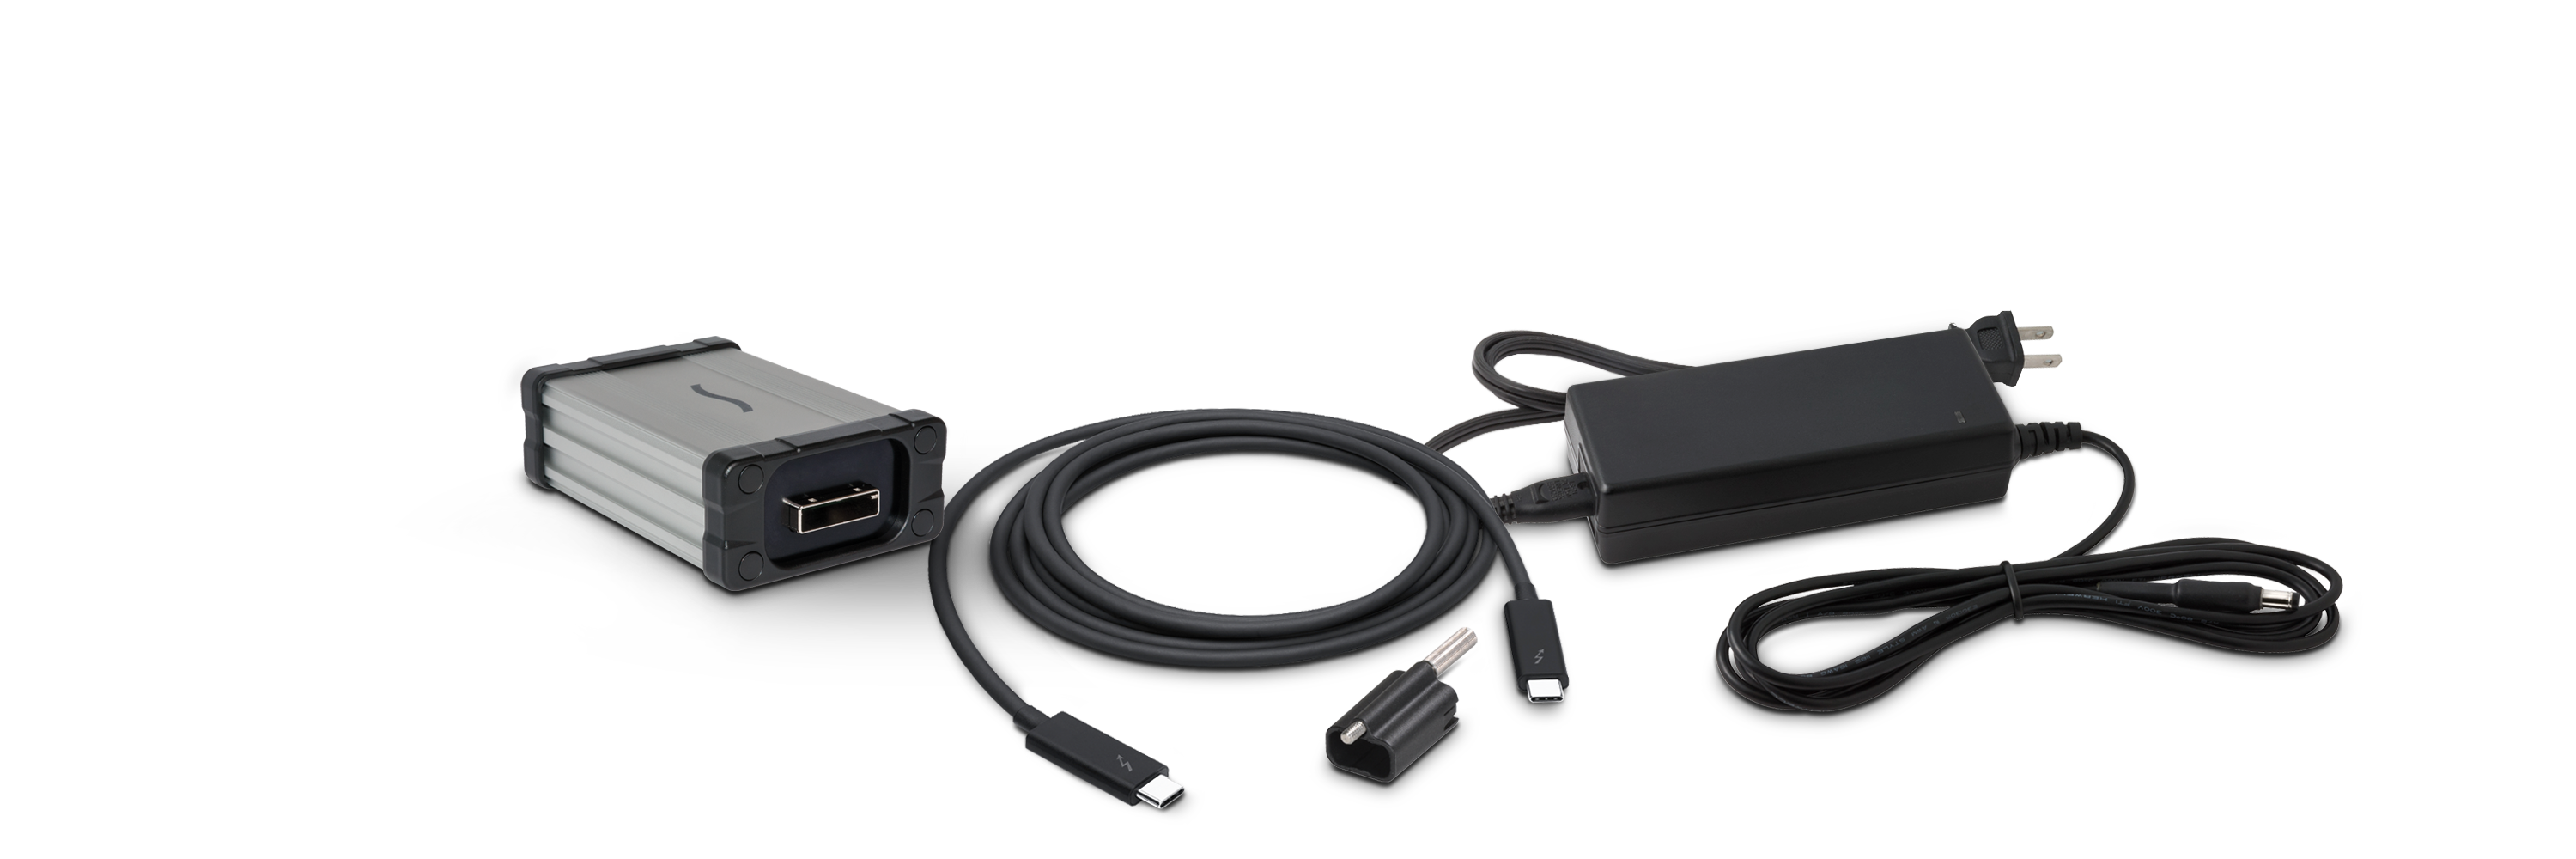 Adapters and Media Readers - SONNETTECH